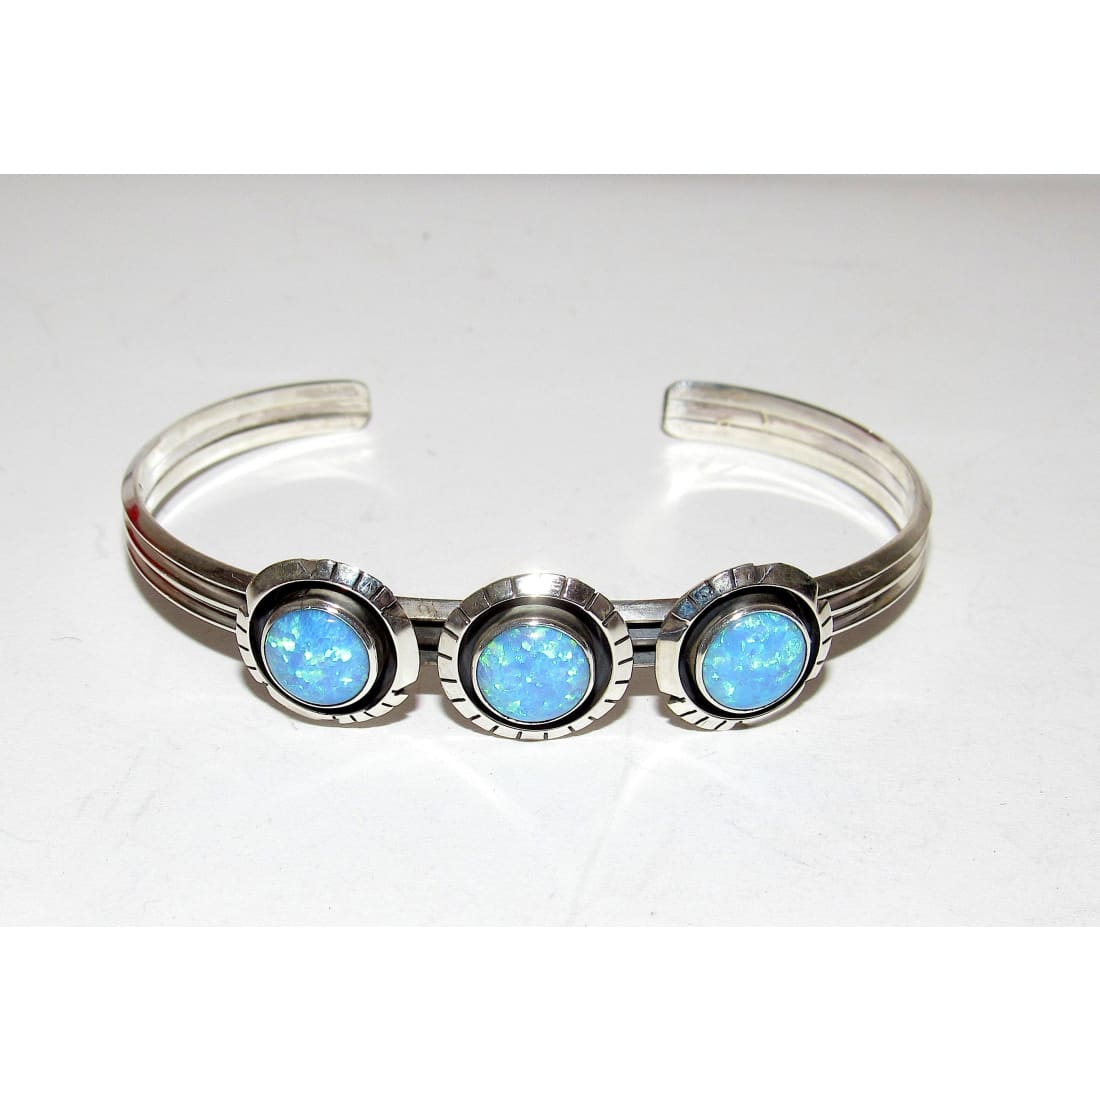 Navajo Opal Bracelet Sterling Silver Stacker Cuff Native American Signed The Southwestern Style Gallery